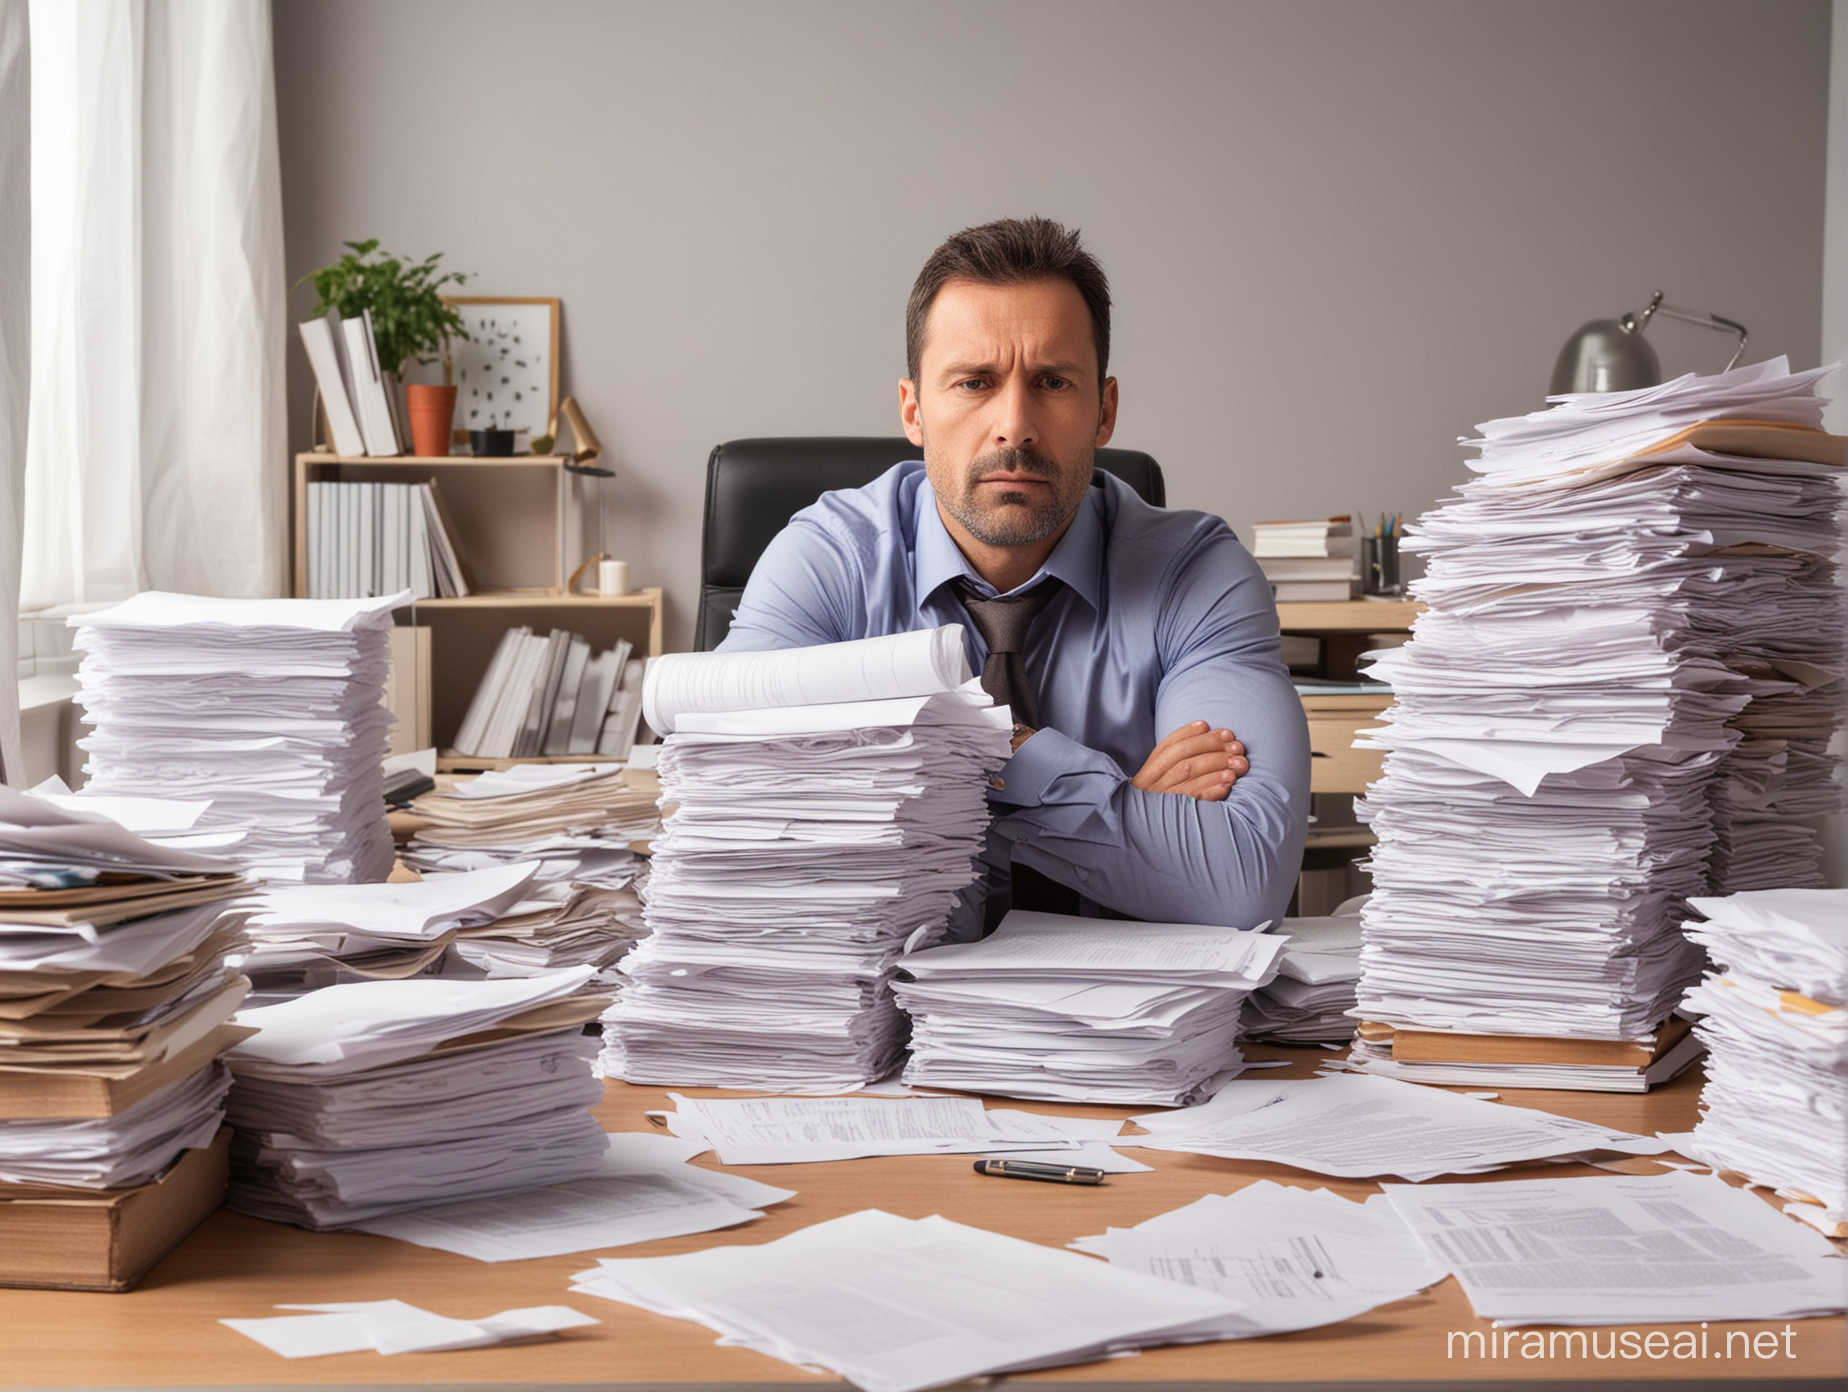 Business man, 45 years old, sitting by his desk at work with piles of papers in front of him. He is kind of tired and feeling overwhelmed